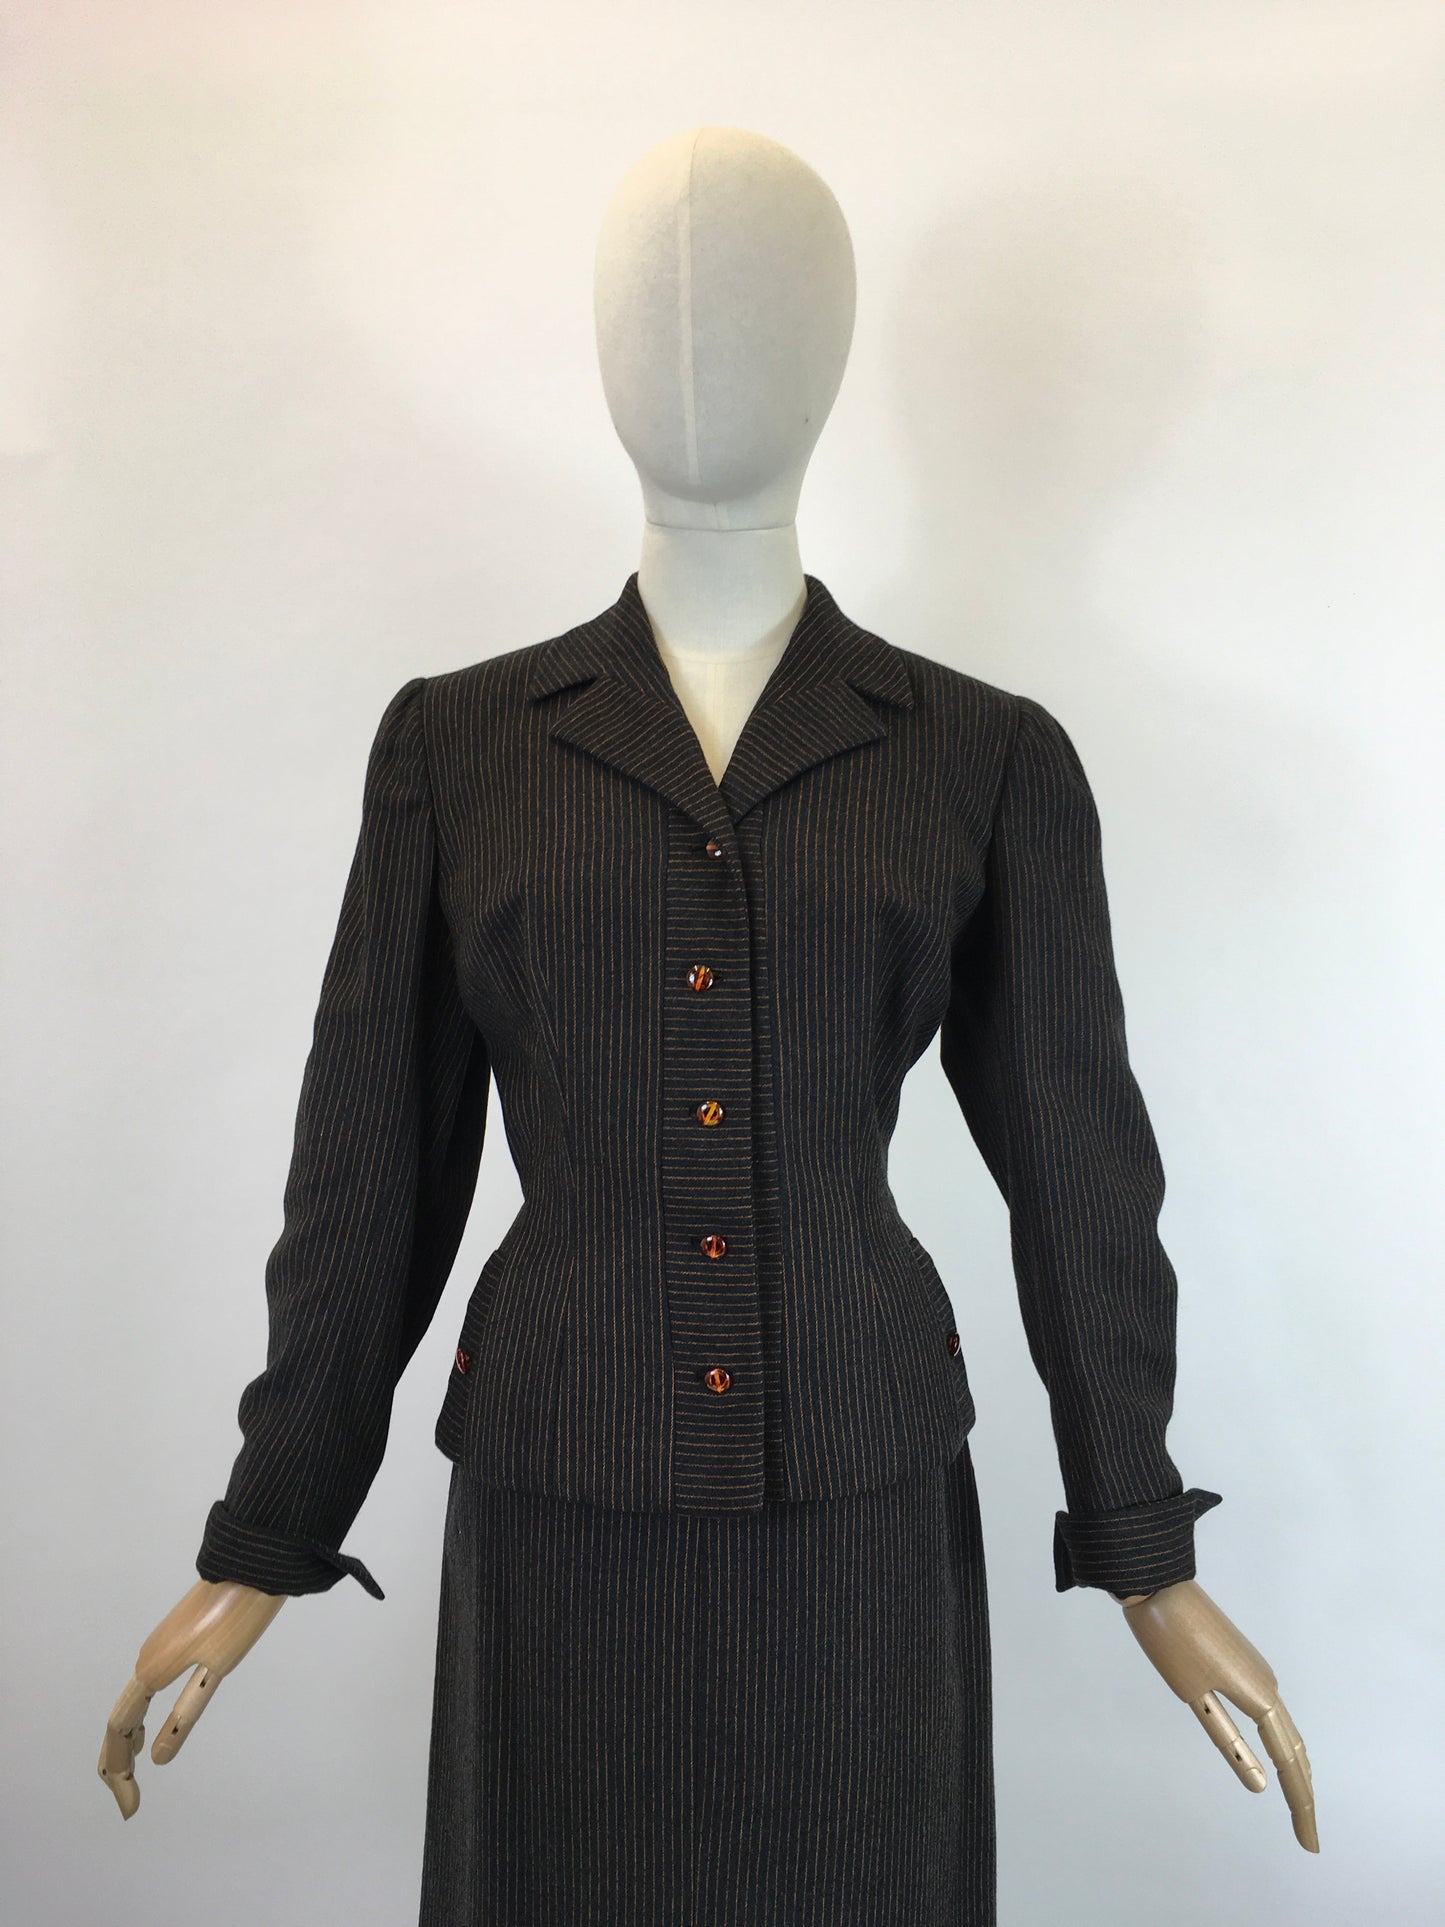 Original 1940’s Sensational American 2pc Suit by ‘ Peck and Peck’ - In Brown and Orange Pinstripe